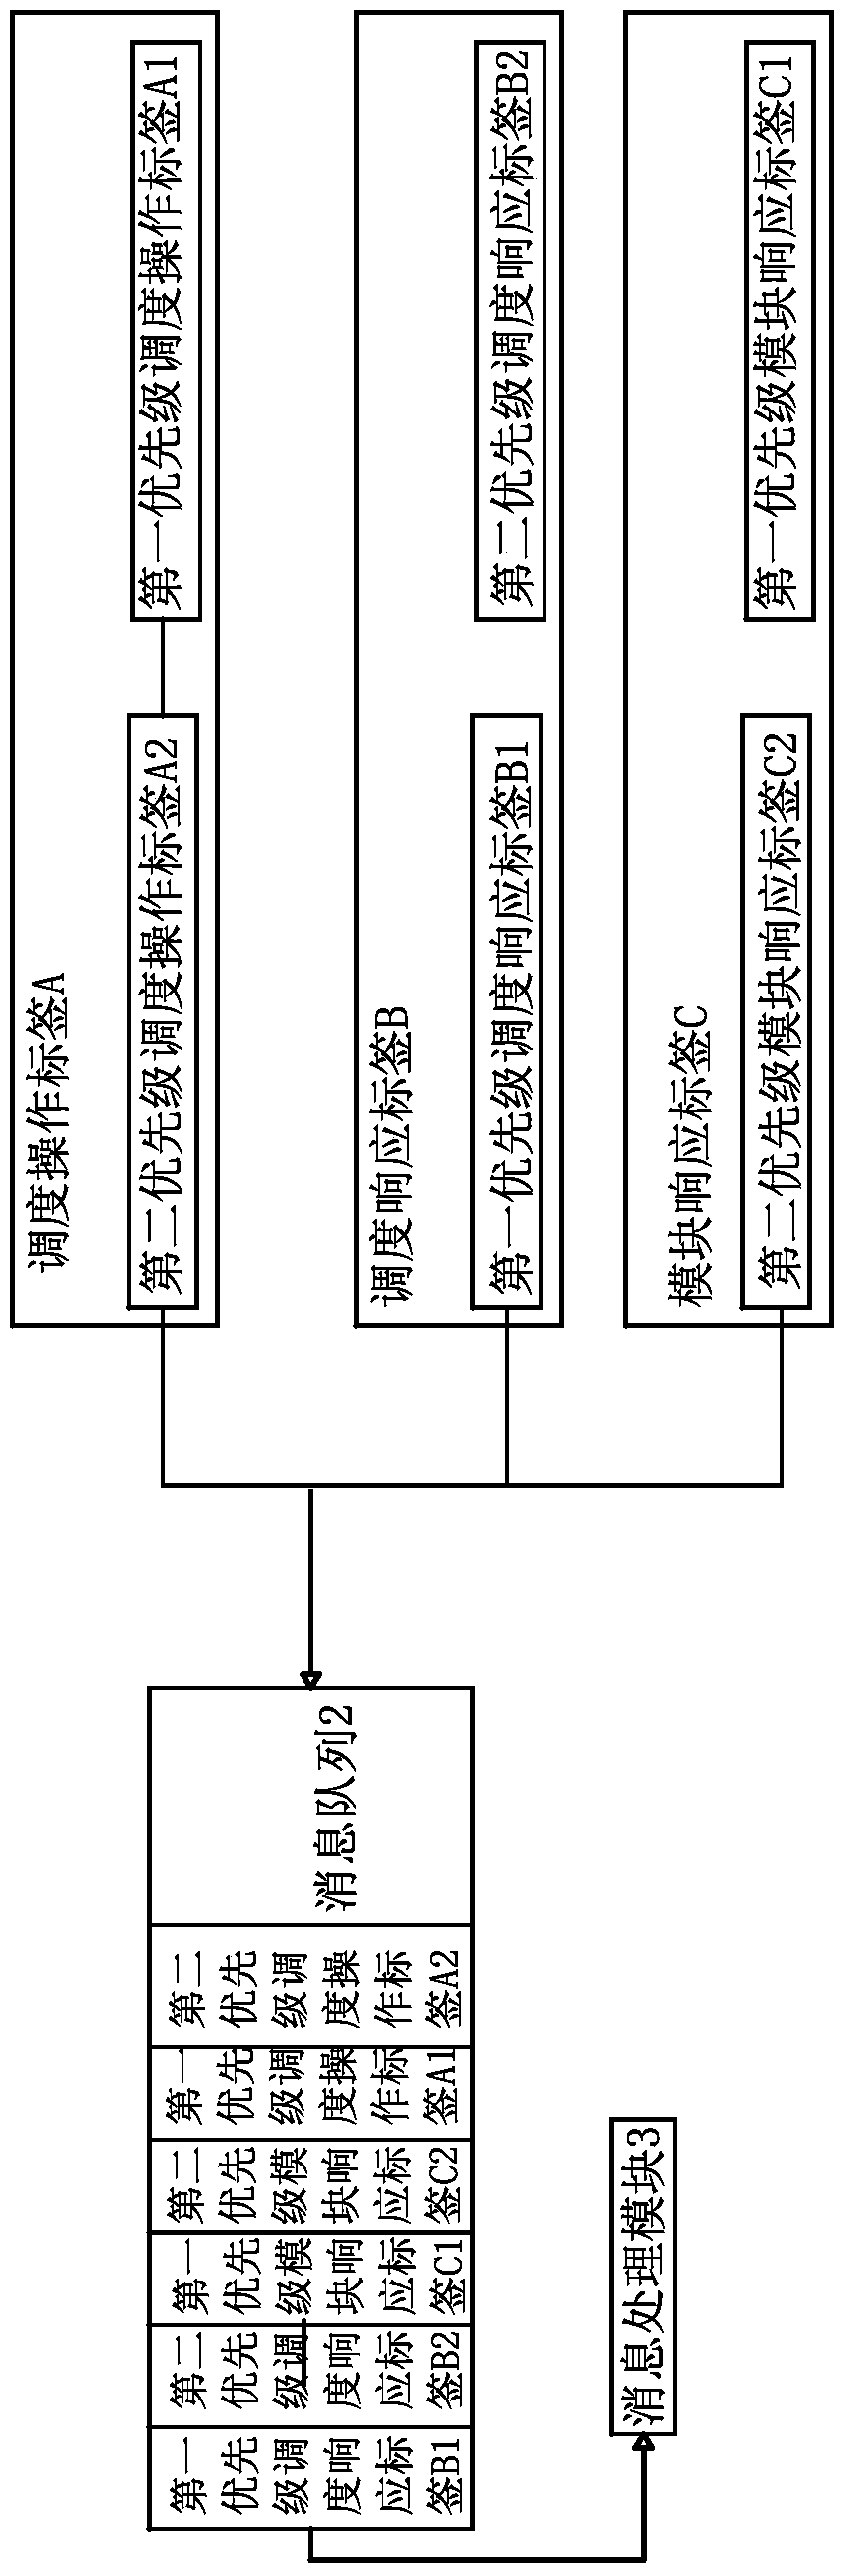 Message Queue Processing Method for Scheduling System